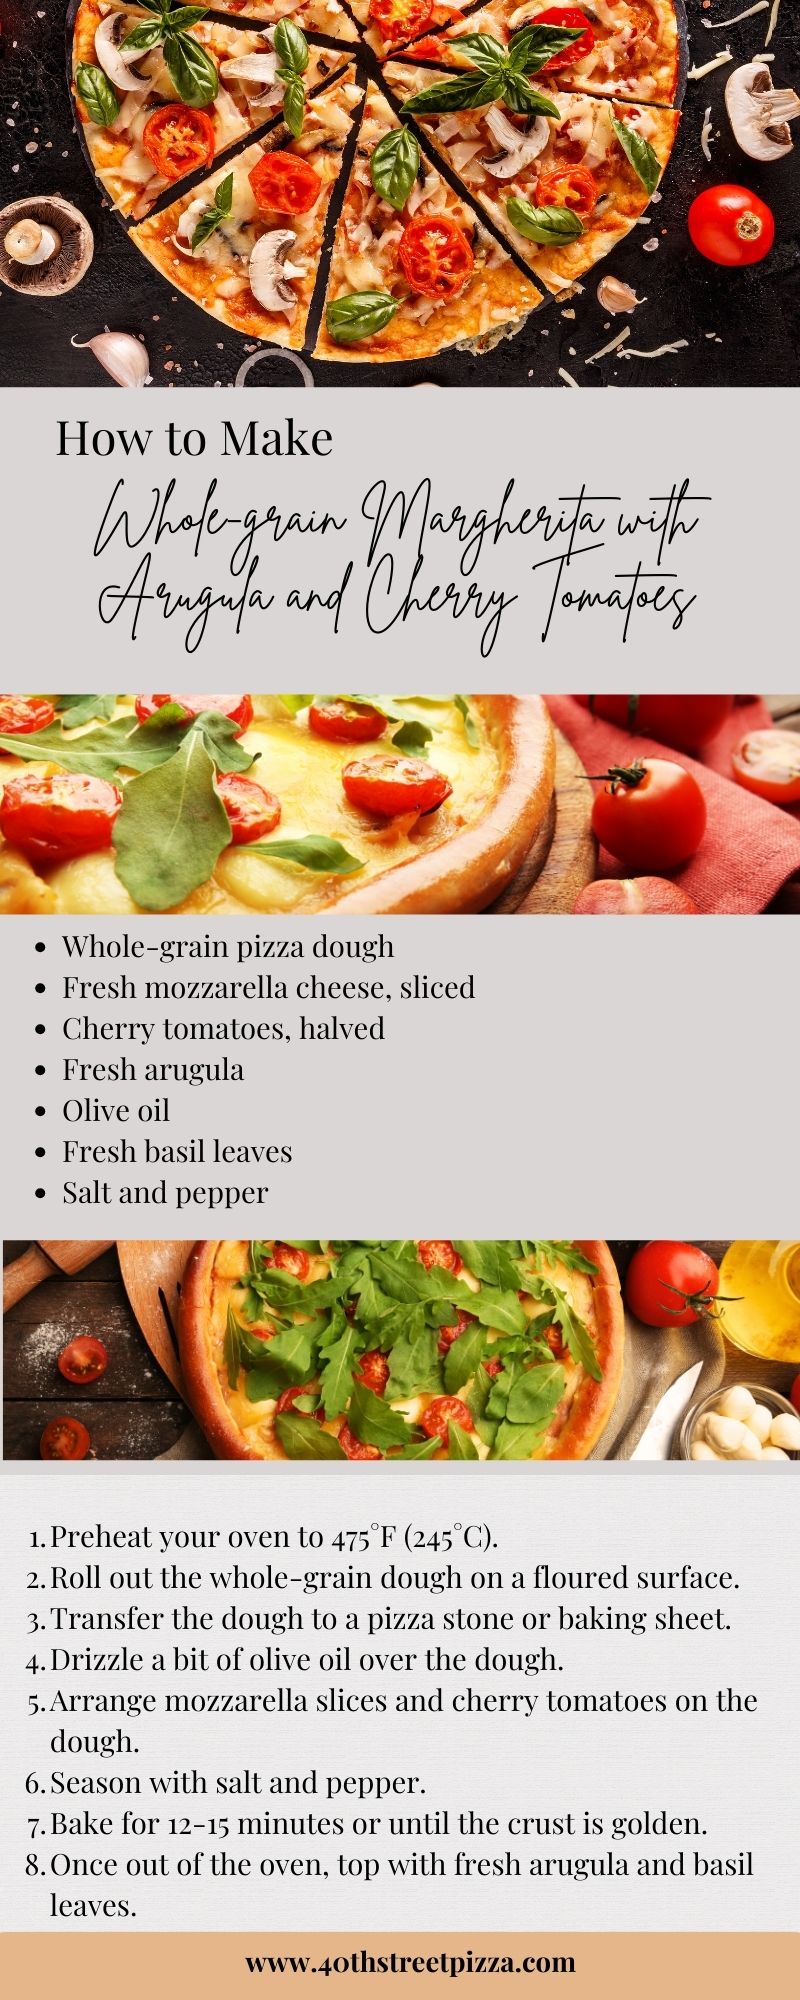 Whole-grain Margherita with Arugula and Cherry Tomatoes infographic